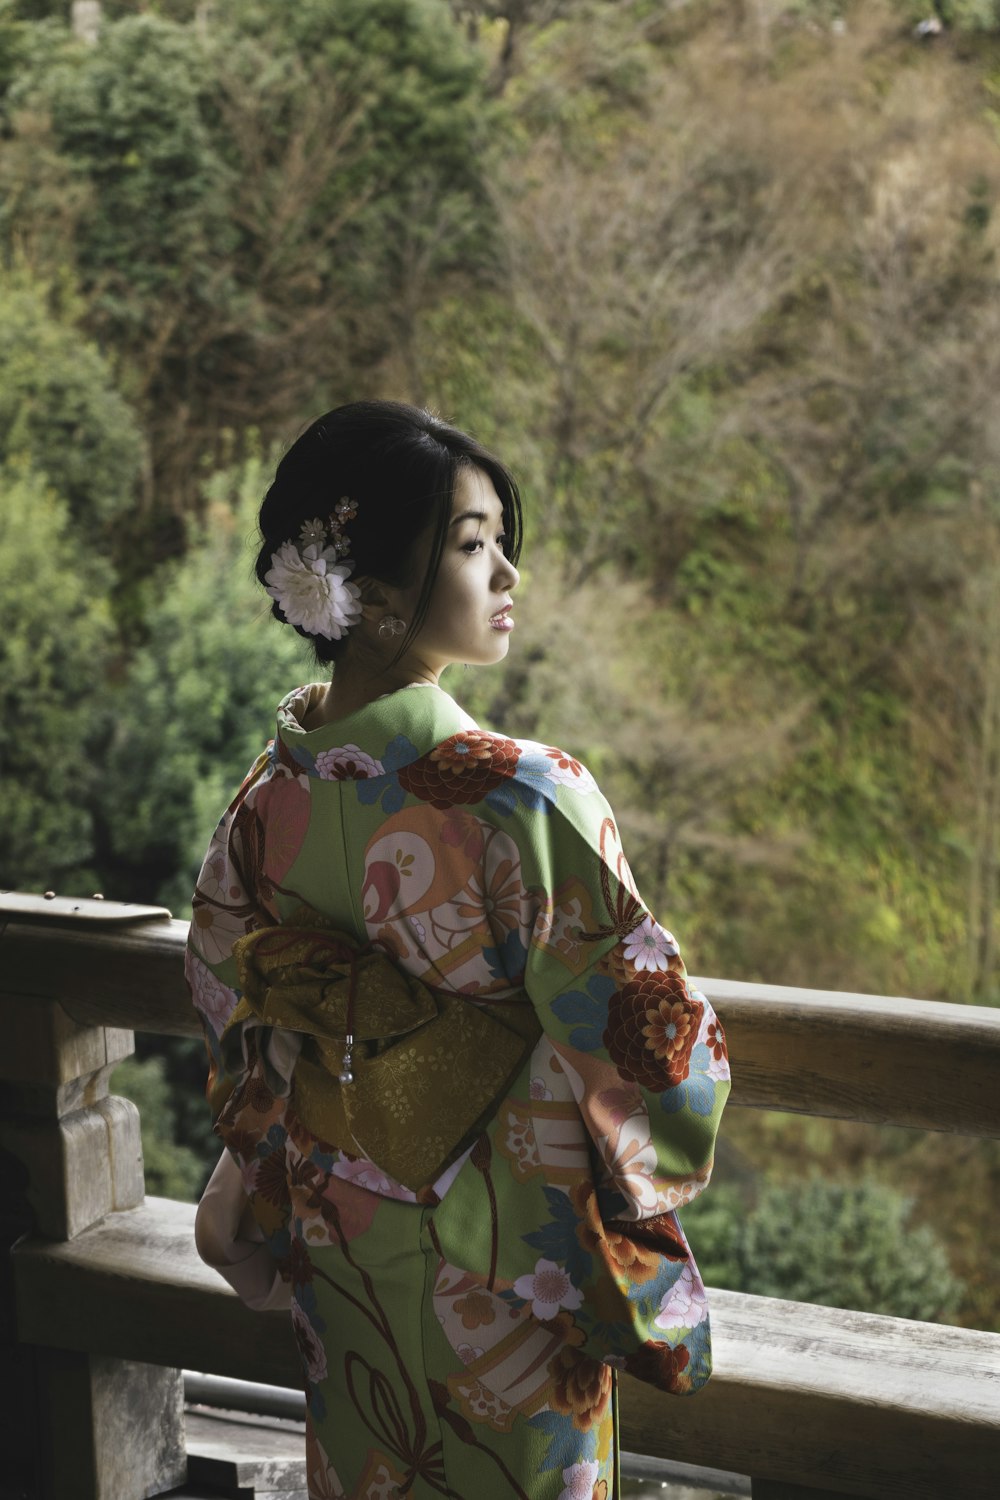 Woman in red and yellow floral kimono standing near brown wooden fence  during daytime photo – Free Kyoto Image on Unsplash